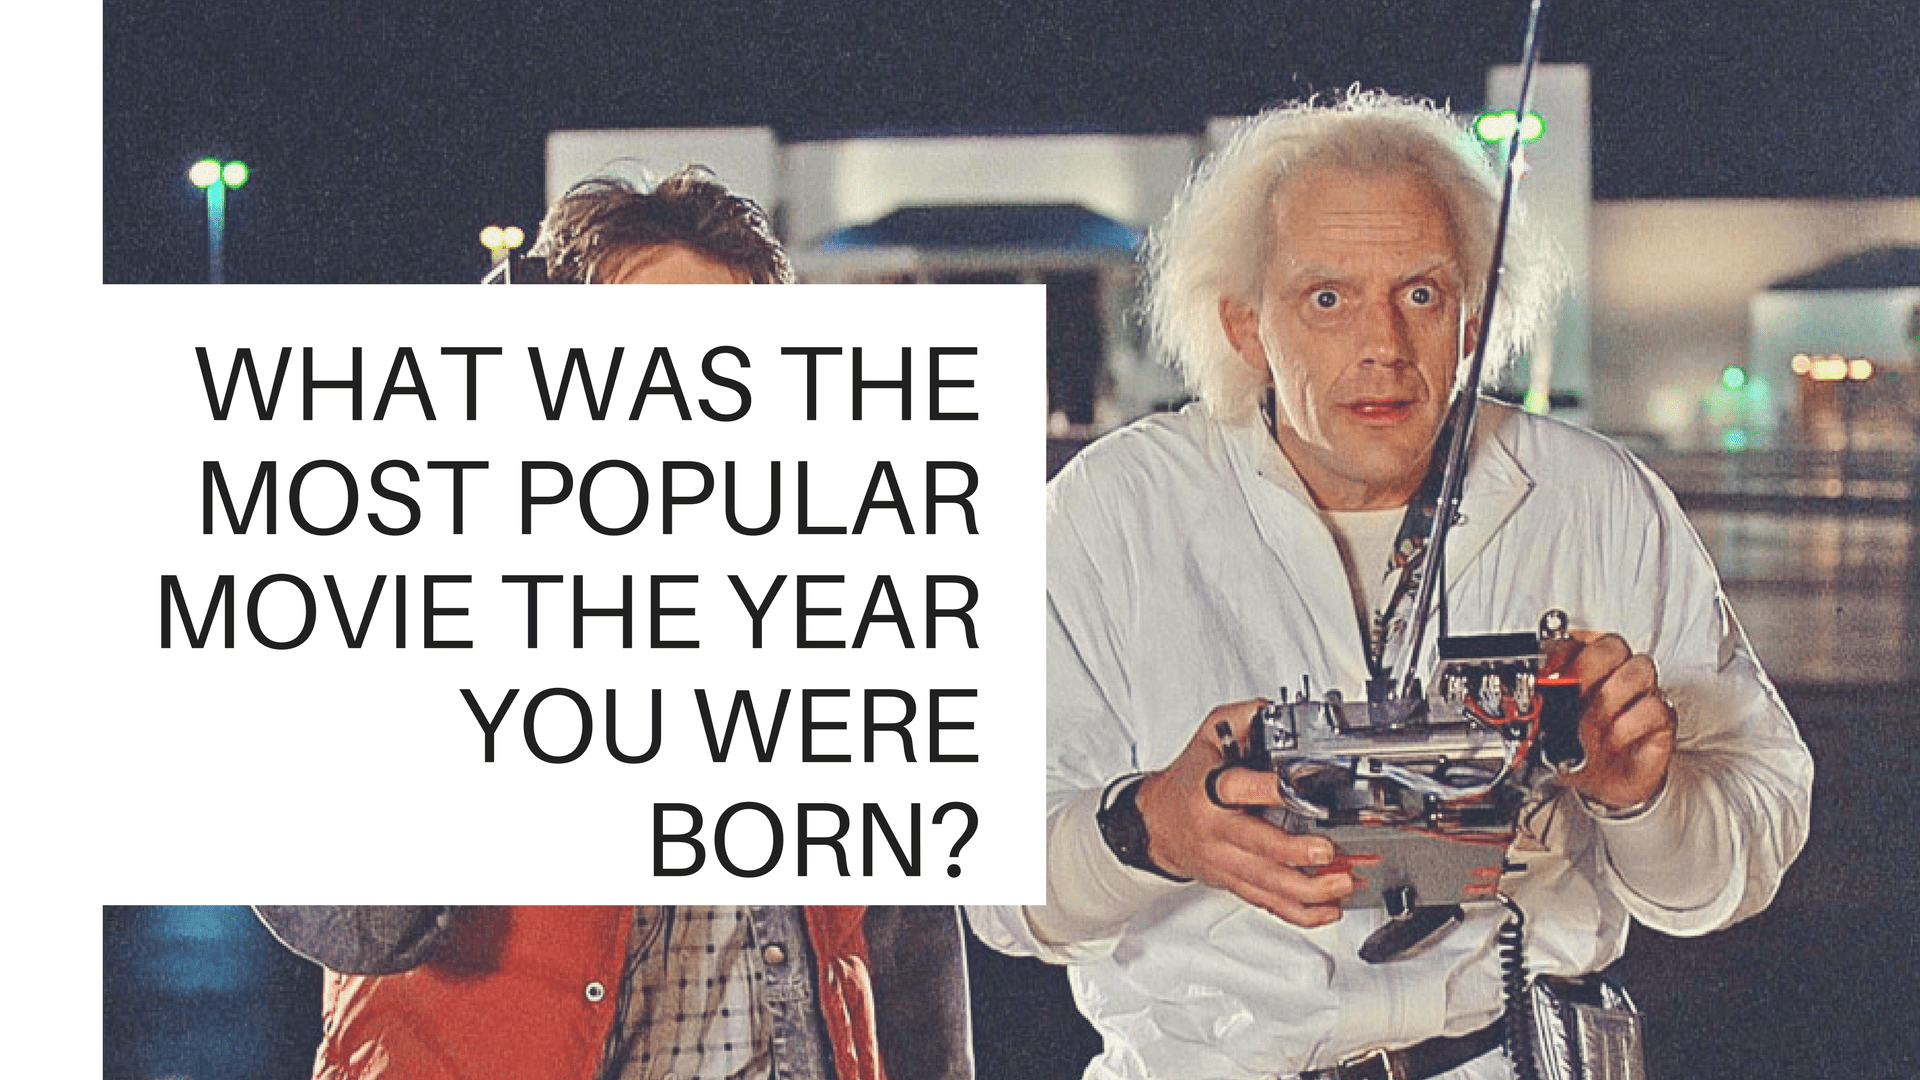 What Was The Most Popular Movie The Year You Were Born?